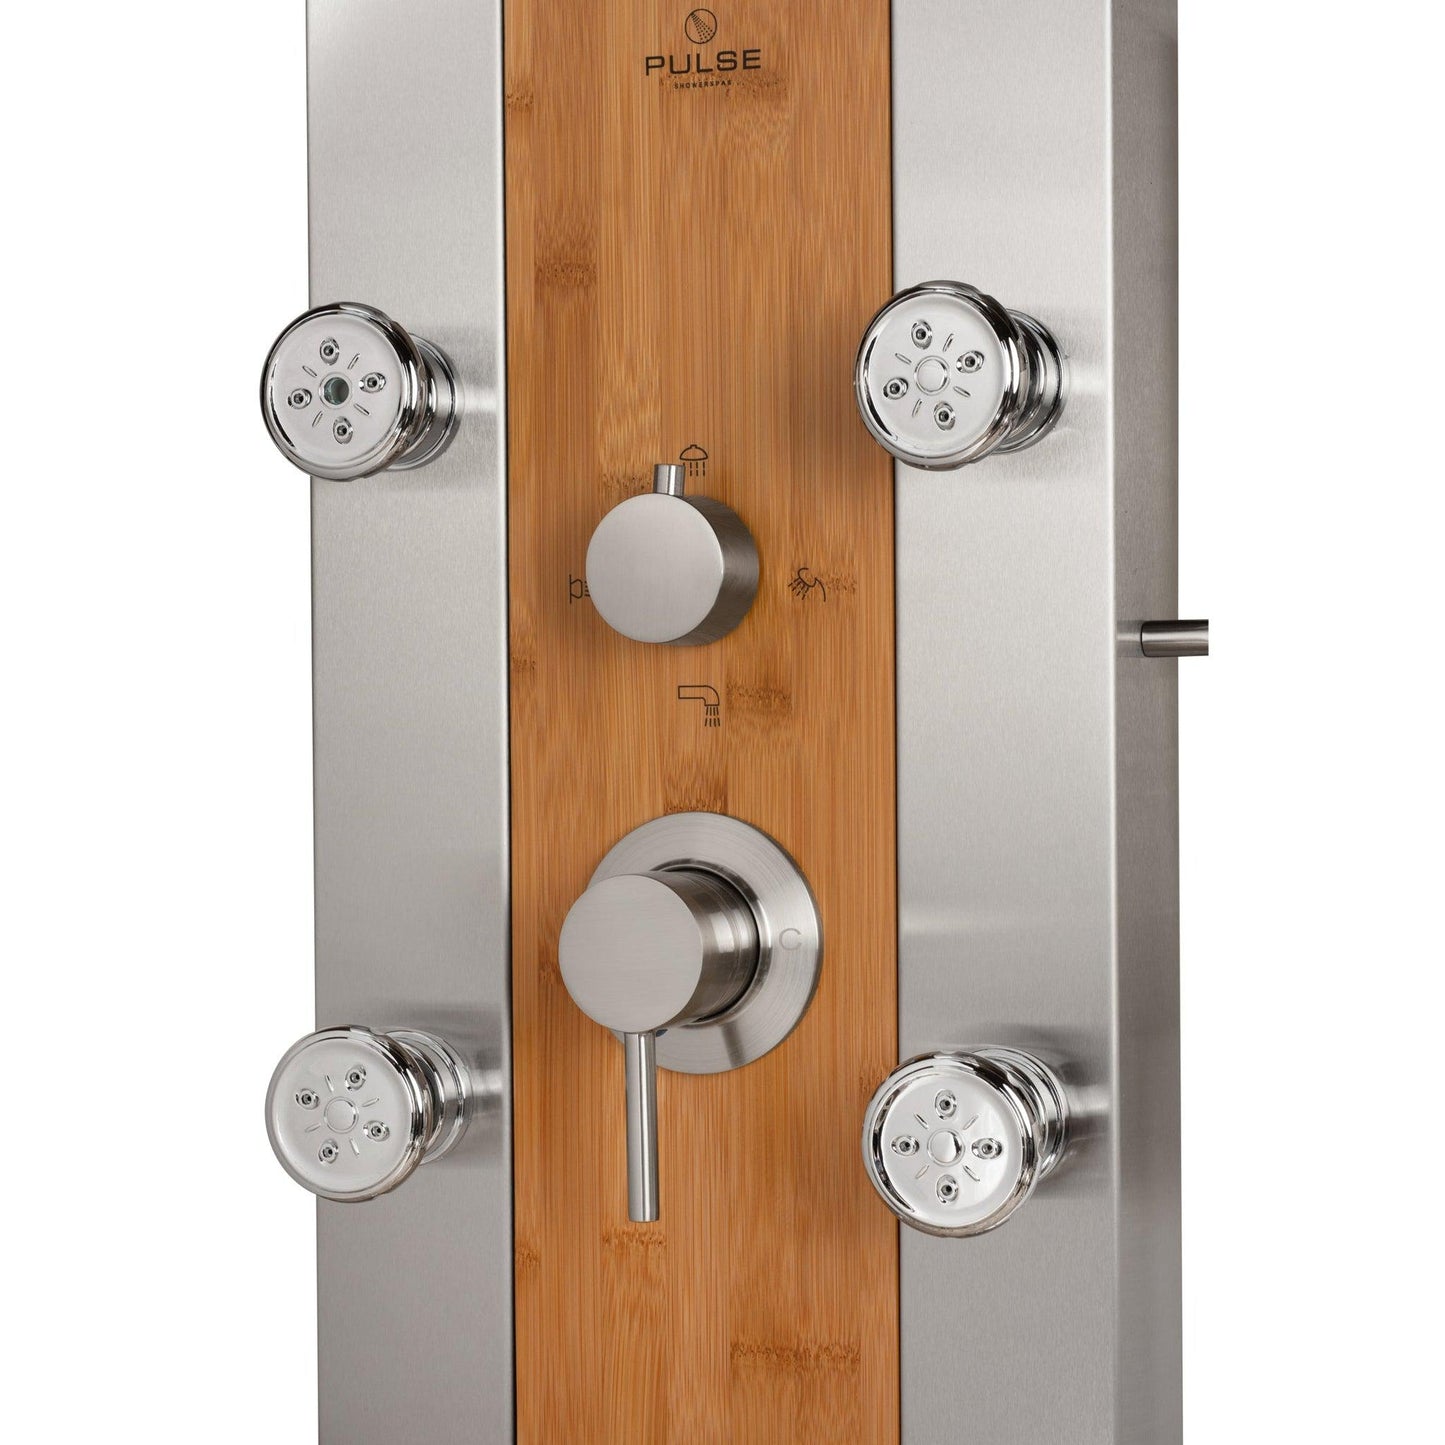 PULSE ShowerSpas Bali 59" Rain Shower Panel in Bamboo and Brushed Stainless Steel Finish With 6-Single Function Body Jets and Hand Shower